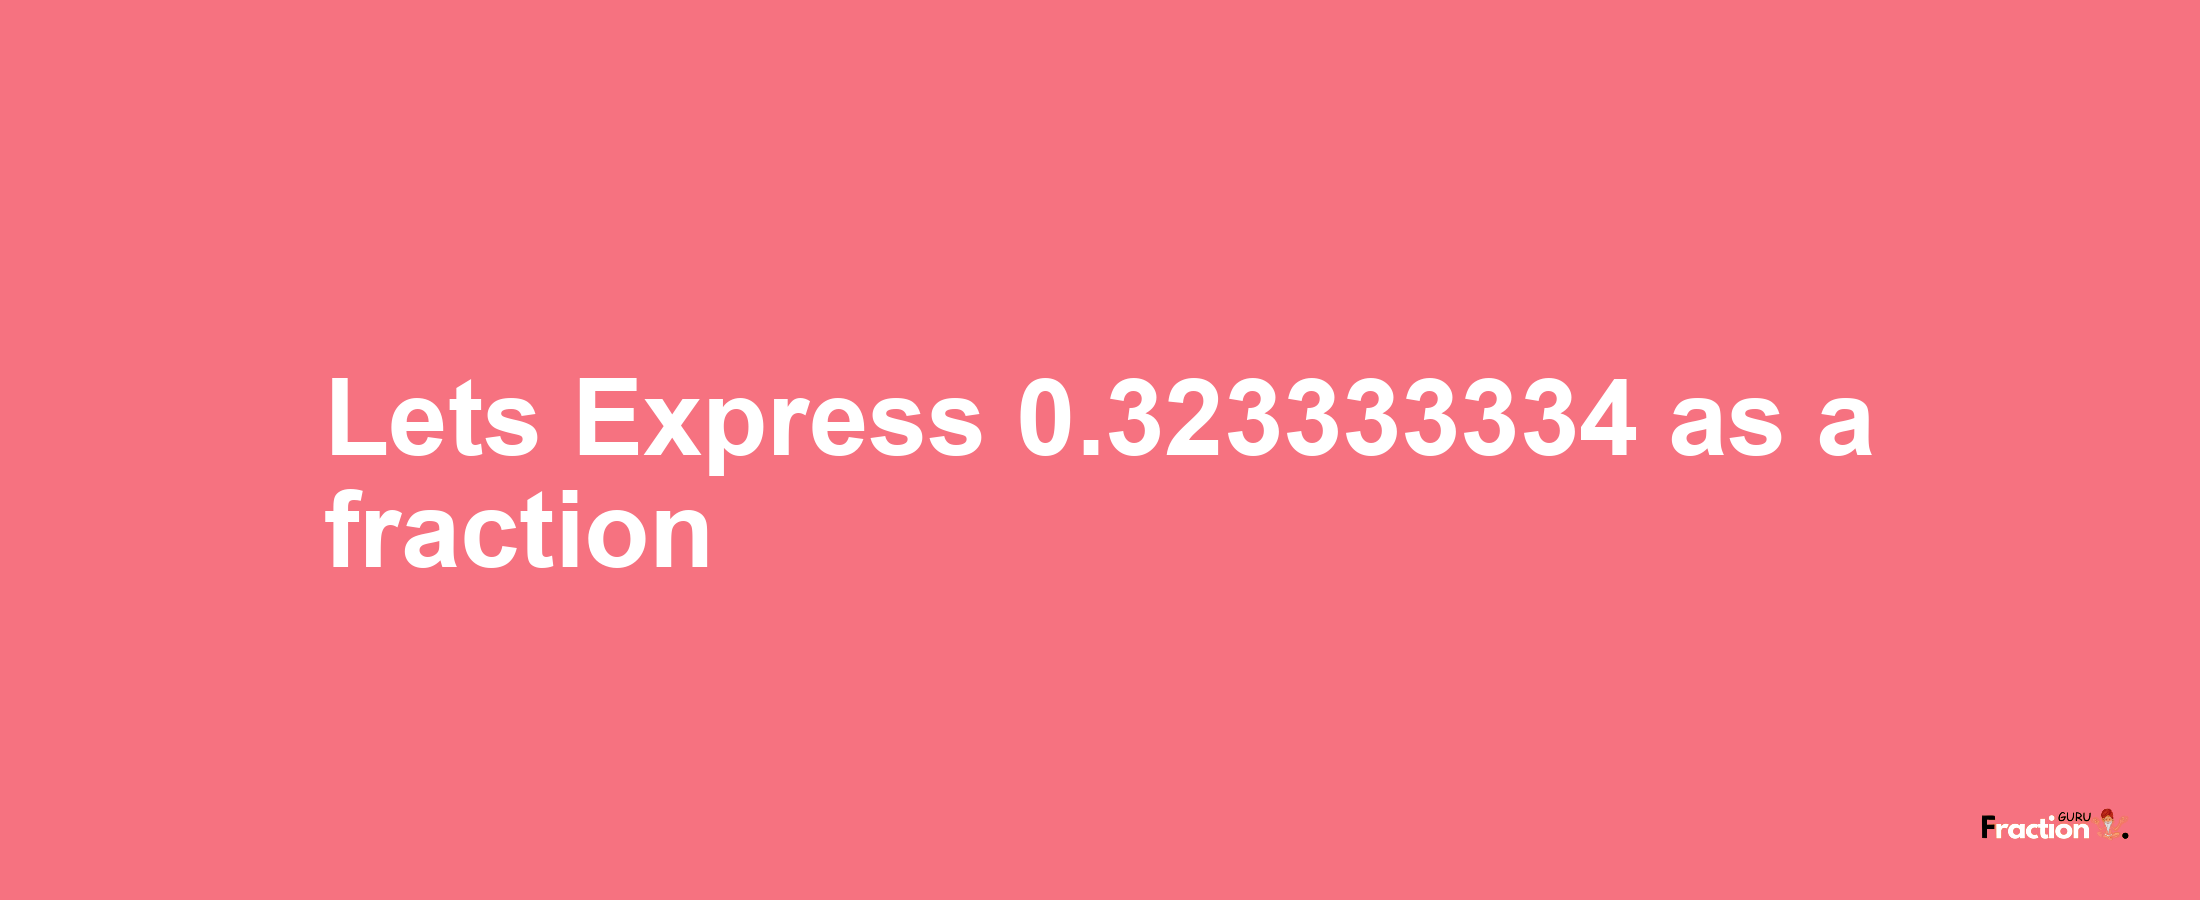 Lets Express 0.323333334 as afraction